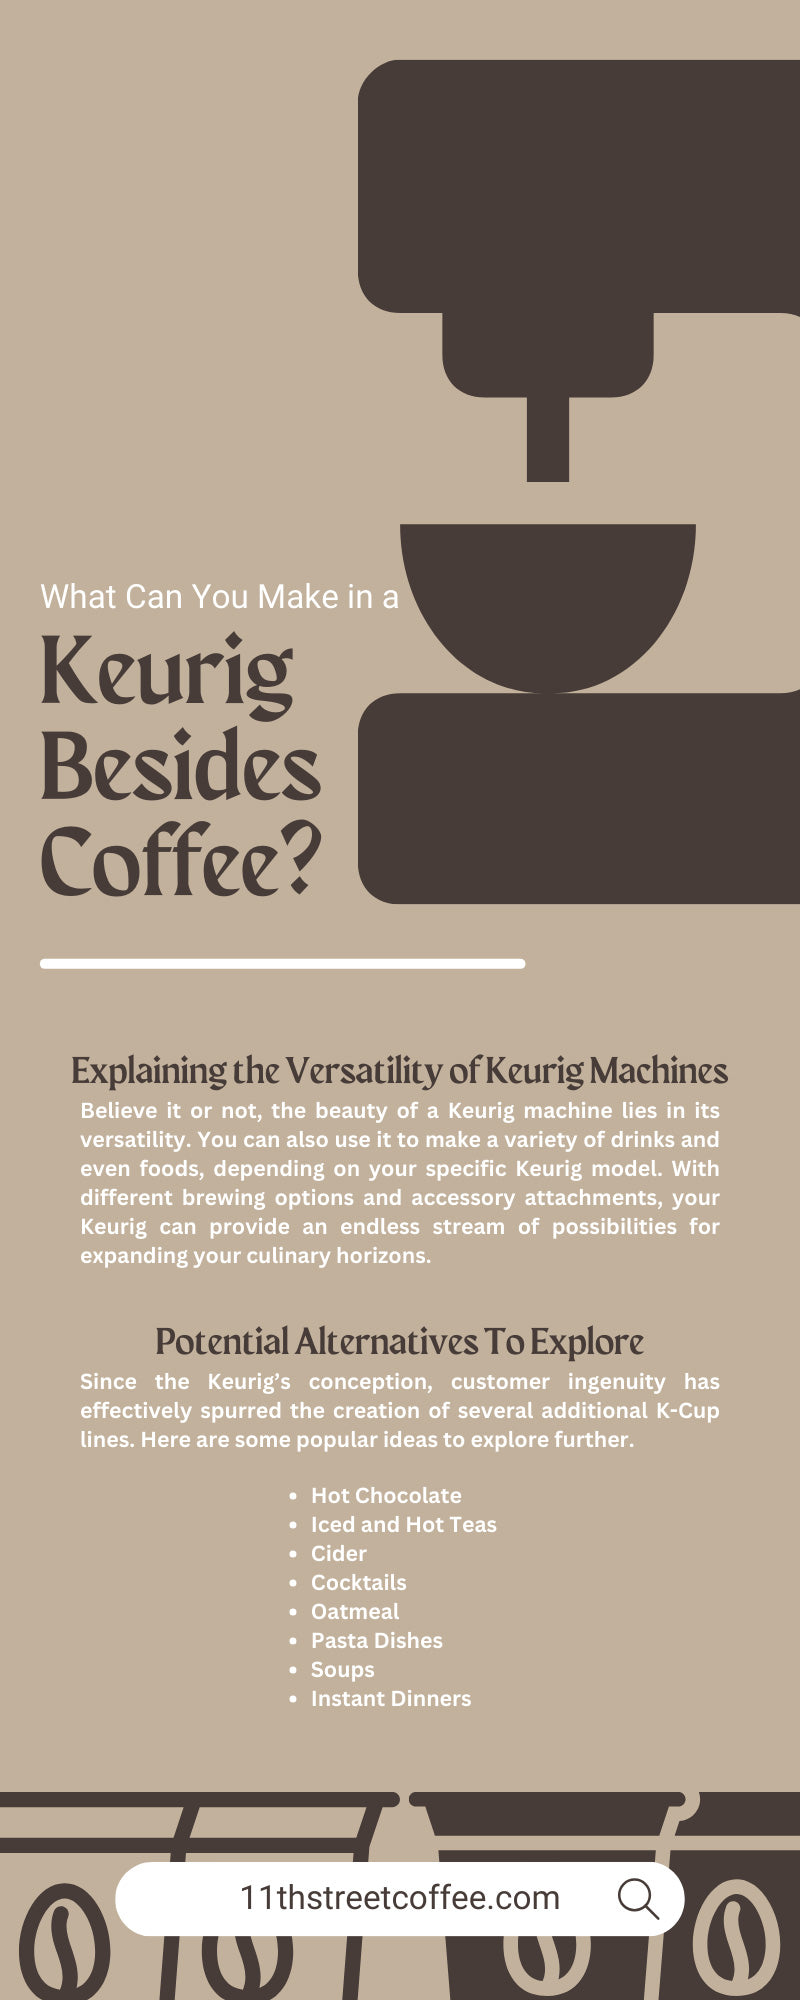 What Can You Make in a Keurig Besides Coffee?